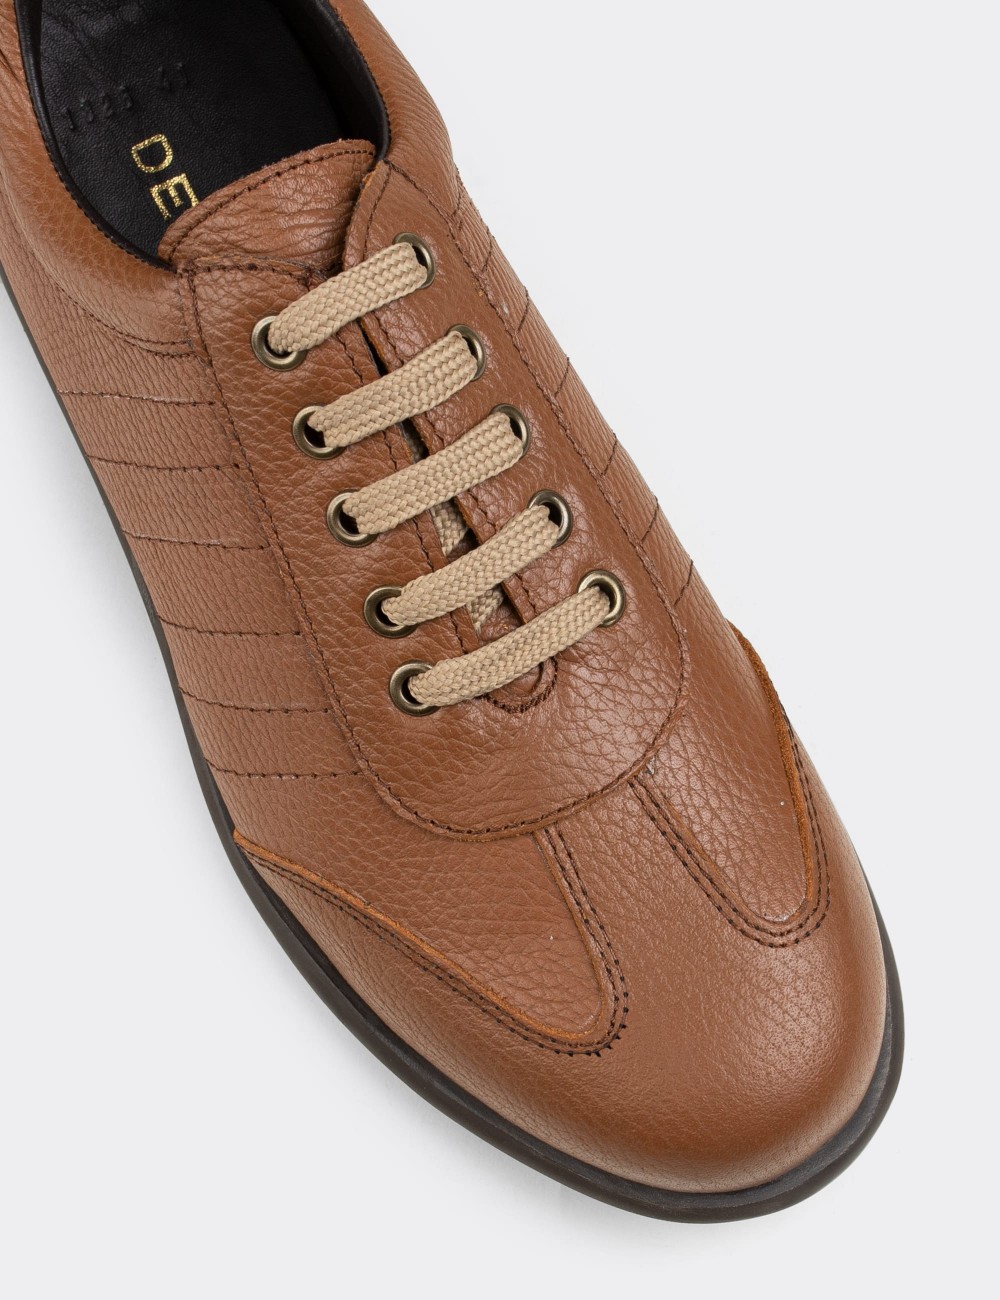 Tan  Leather Lace-up Shoes - 01826MTBAC05